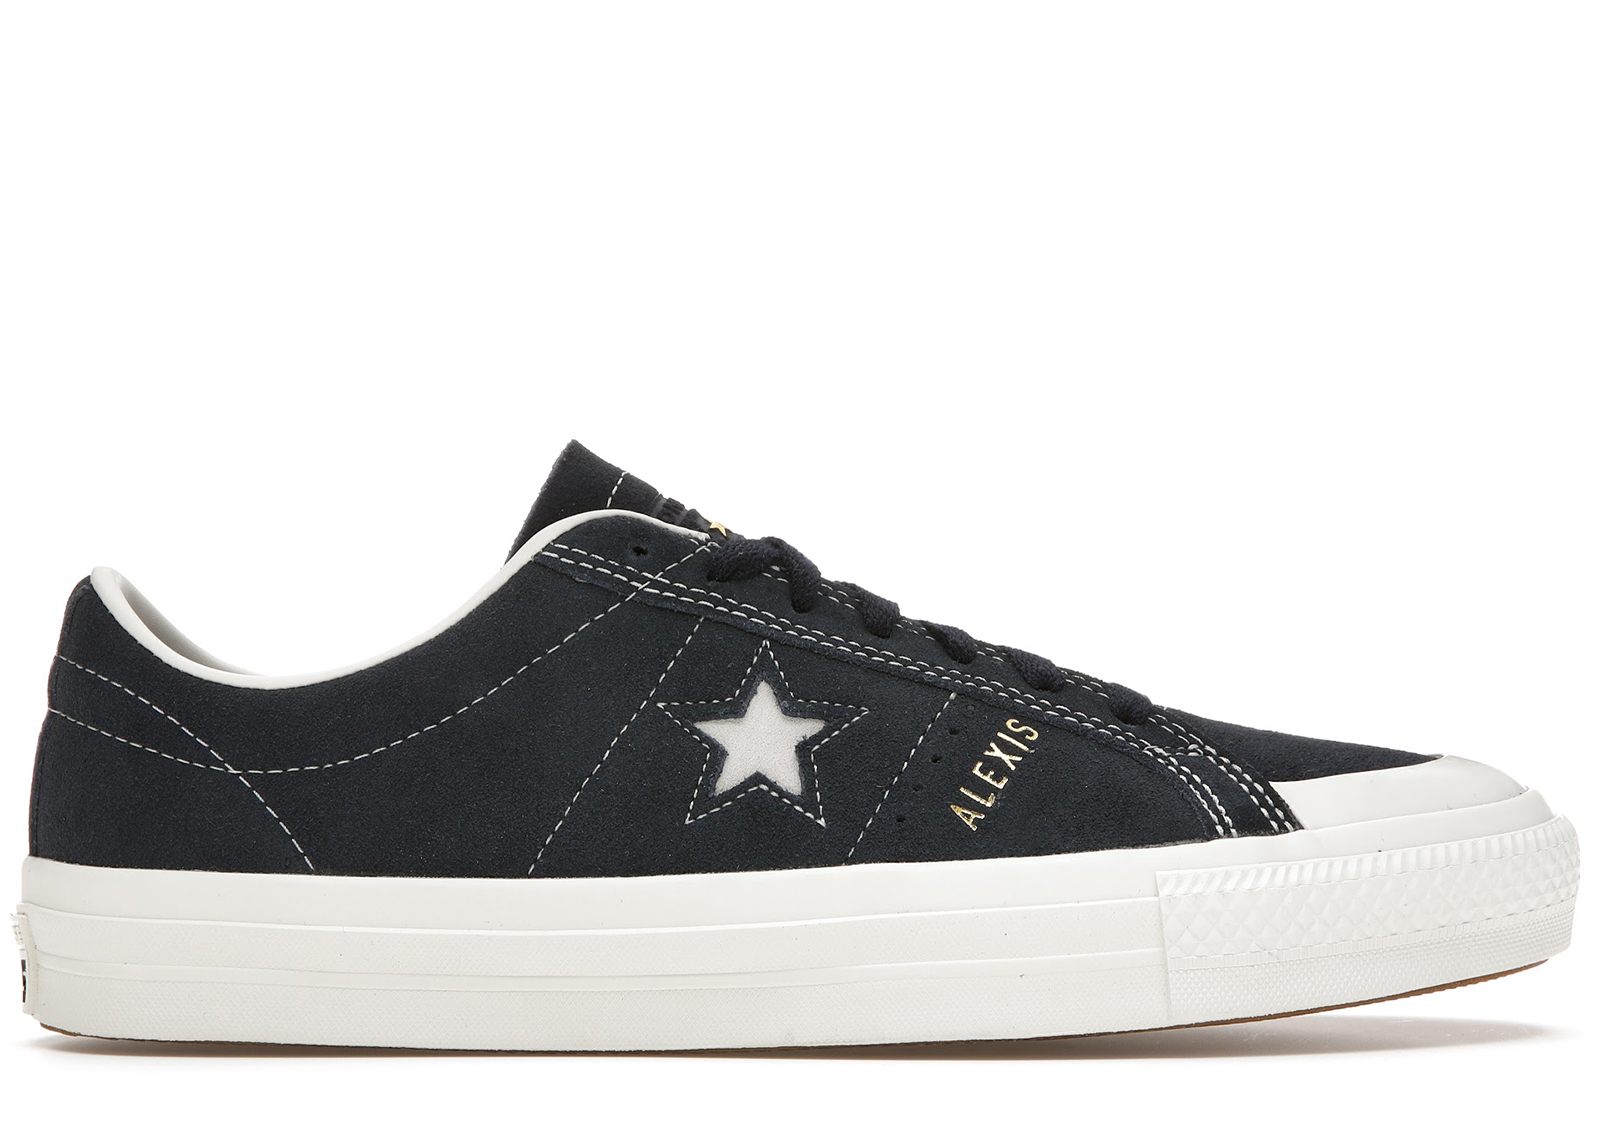 Converse CONS One Star Pro AS Obsidian - 167615C